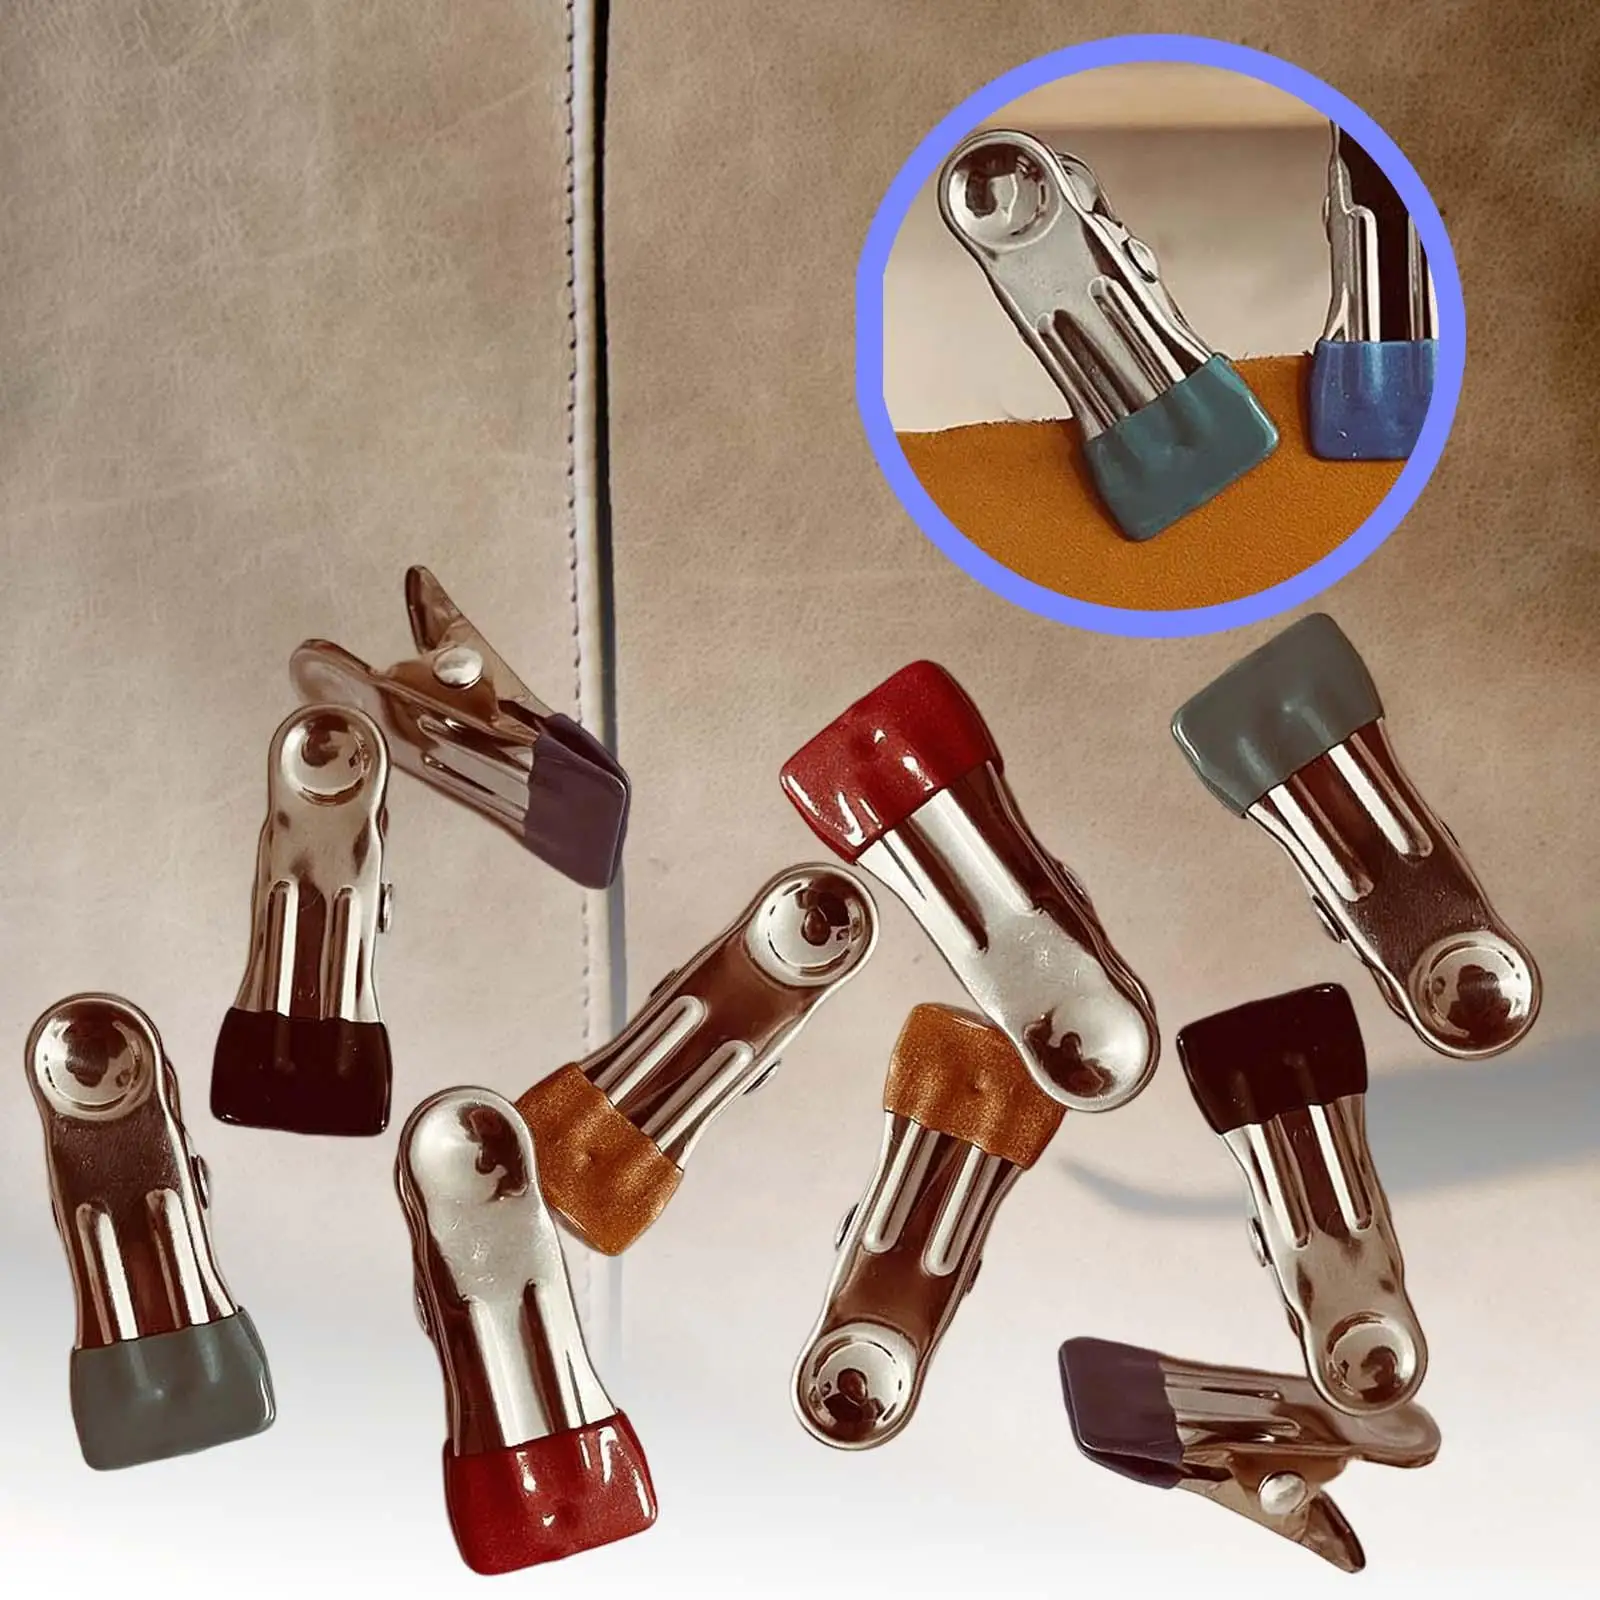 10 Pieces Stainless Steel Sewing Clips No Trace Clip Fabric Clamps Multifunction